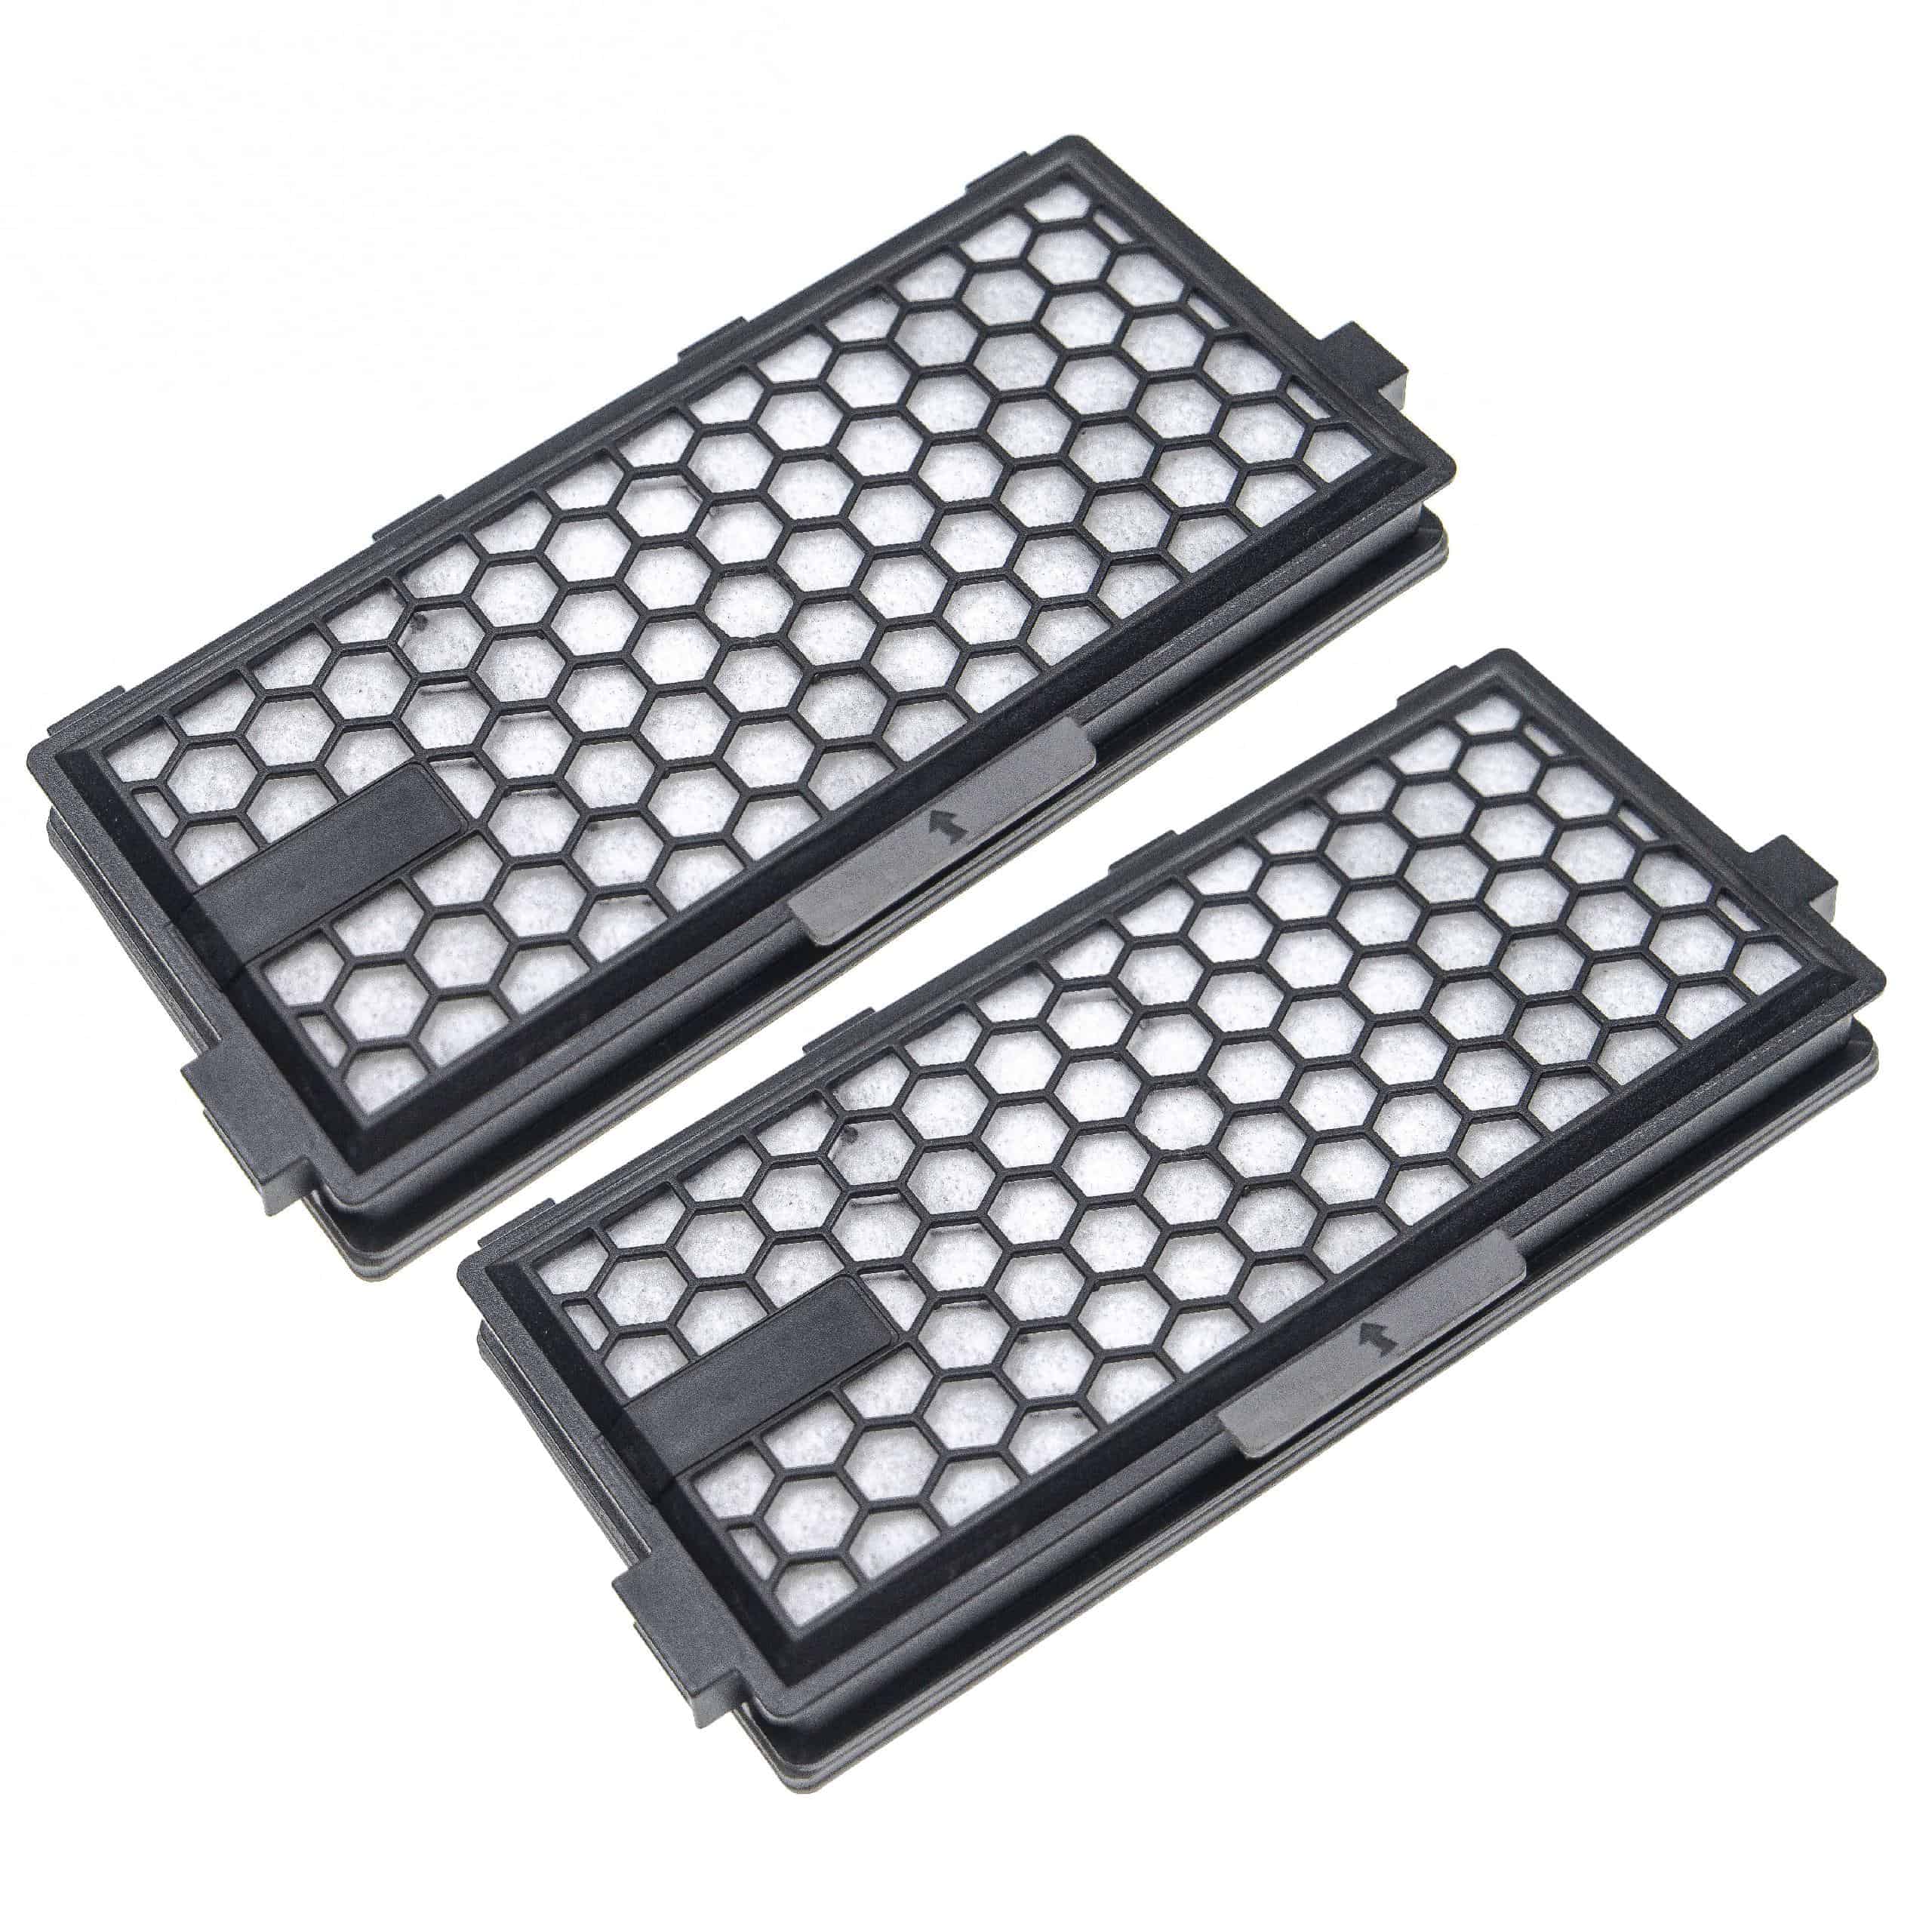 2x HEPA/activated carbon filter replaces Miele 5996882, 5996880, 5996881, 7226150 for MieleVacuum Cleaner